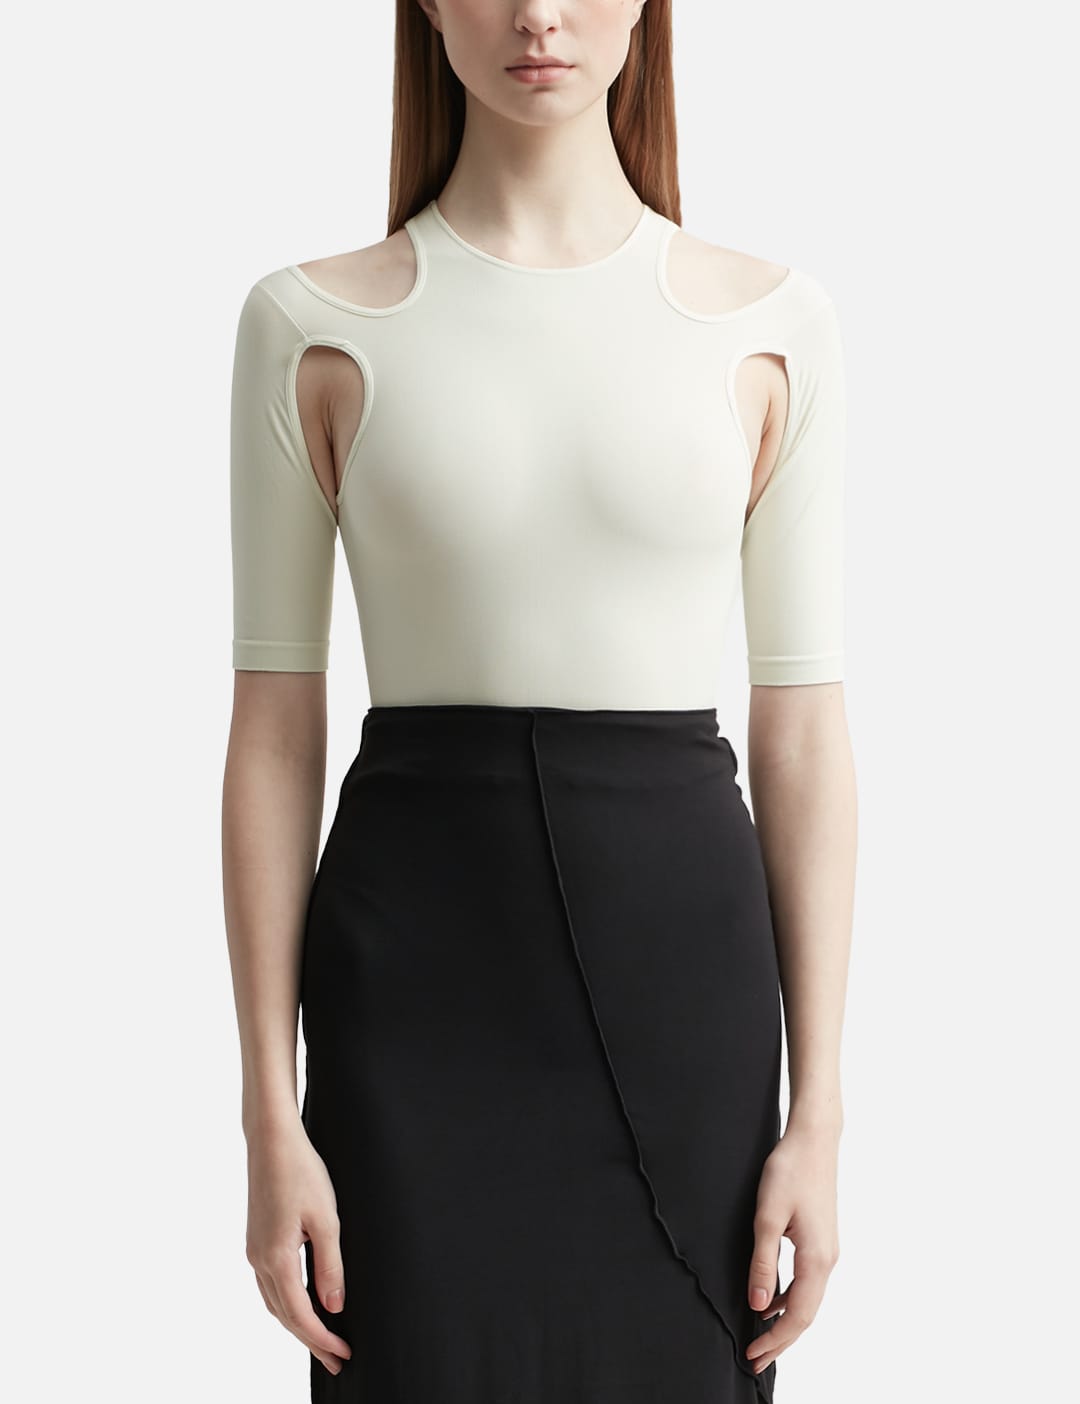 ANDRE?DAMO Cut-Out Detail Sculpted Body Top